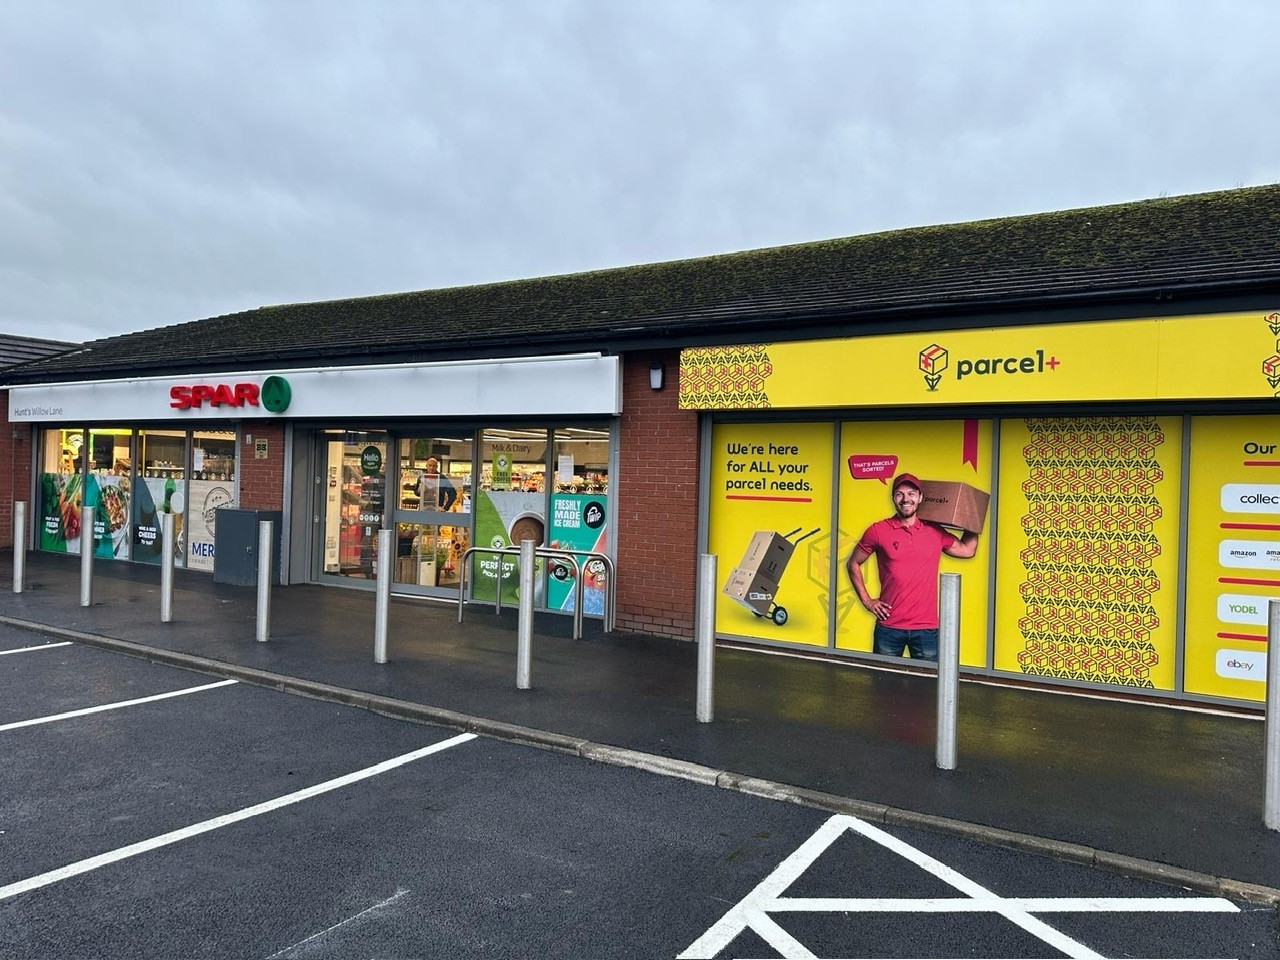 Hunts SPAR Willow Lane in Lancaster, where a new Parcel+ concept has been introduced - a hub entirely separate from the SPAR customer counter to deal with parcels.